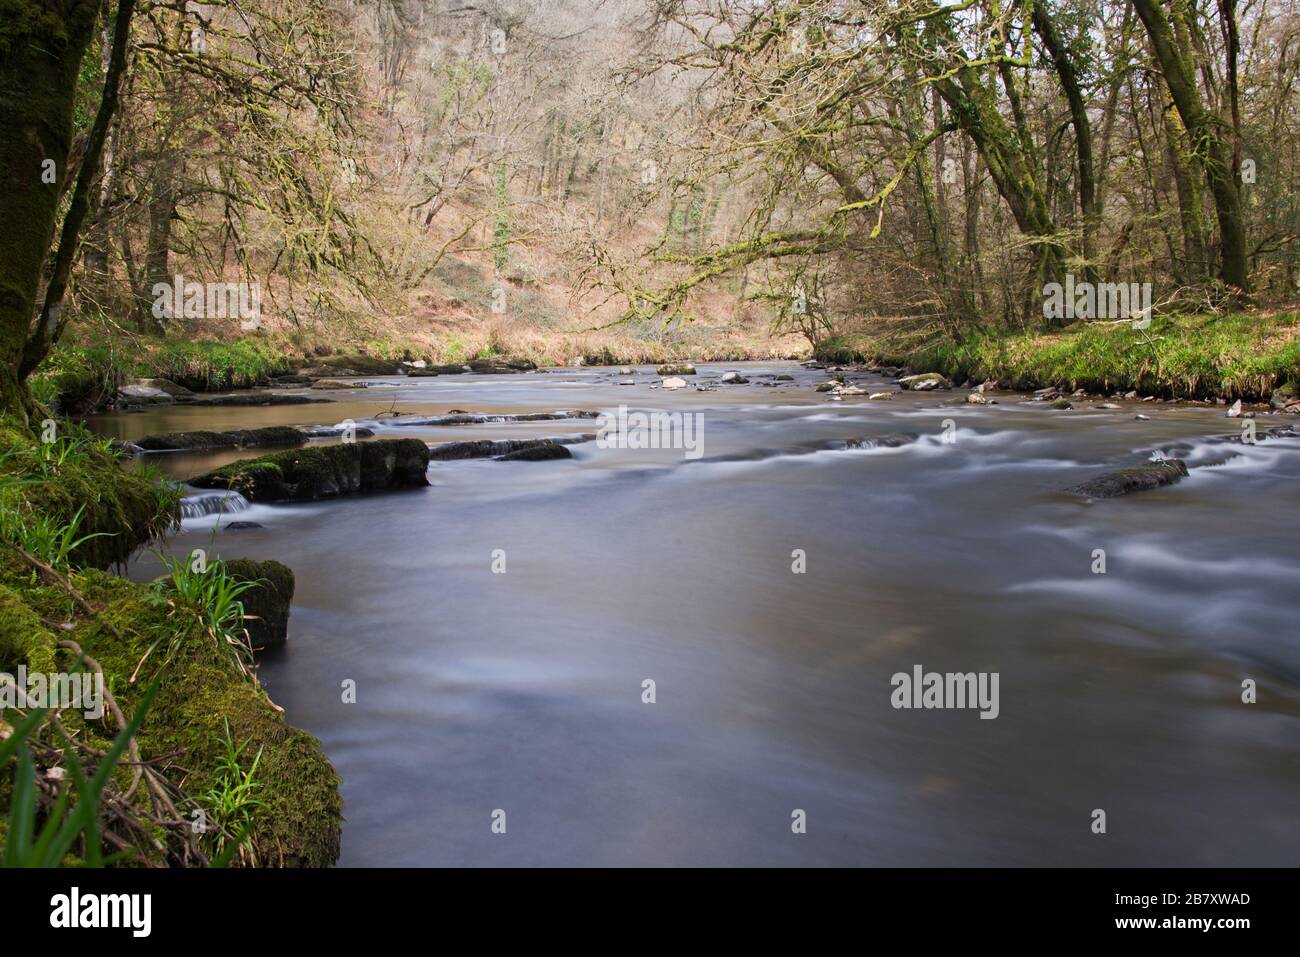 a Springtime picture of the River Barle close to Mounsey Castle near Dulverton, in Somerset, England,  part of the Exmoor national Park Stock Photo